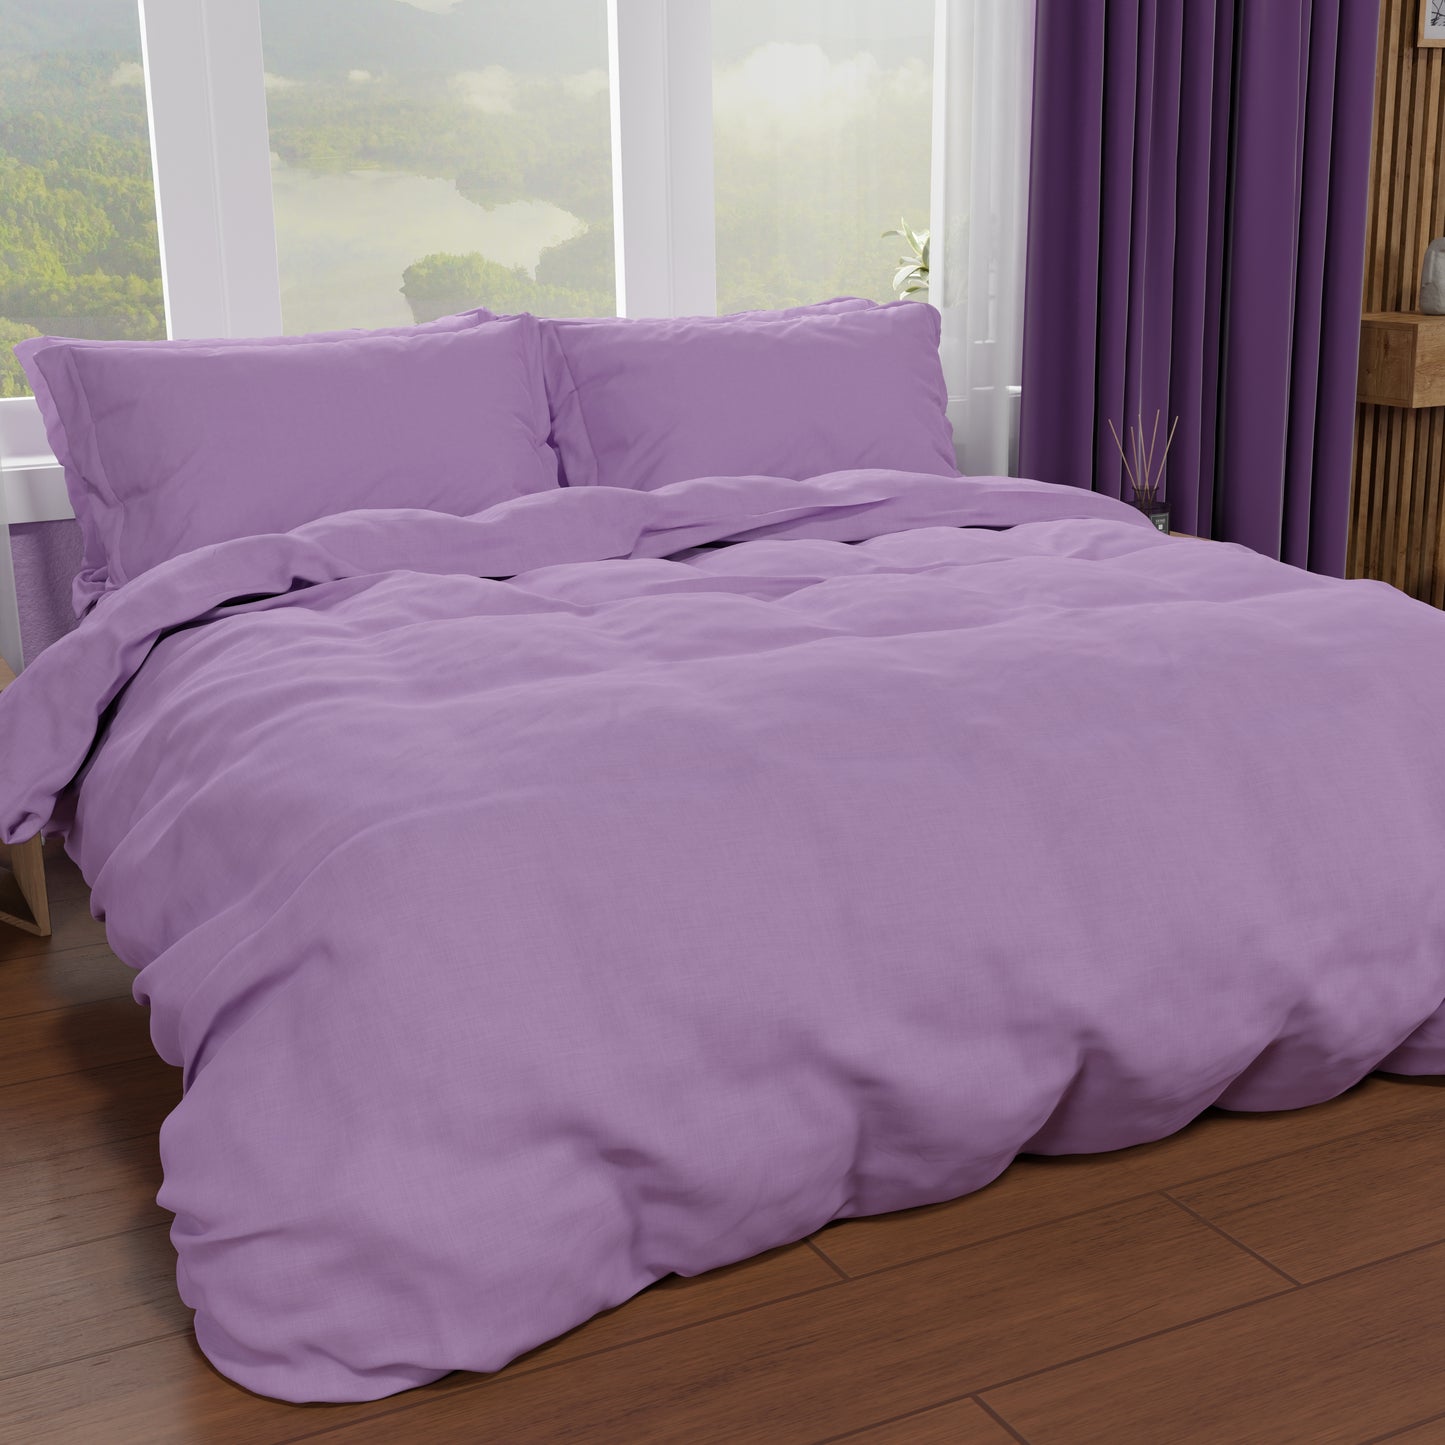 Double Duvet Cover, Duvet Cover and Pillowcases, Solid Color Lilac